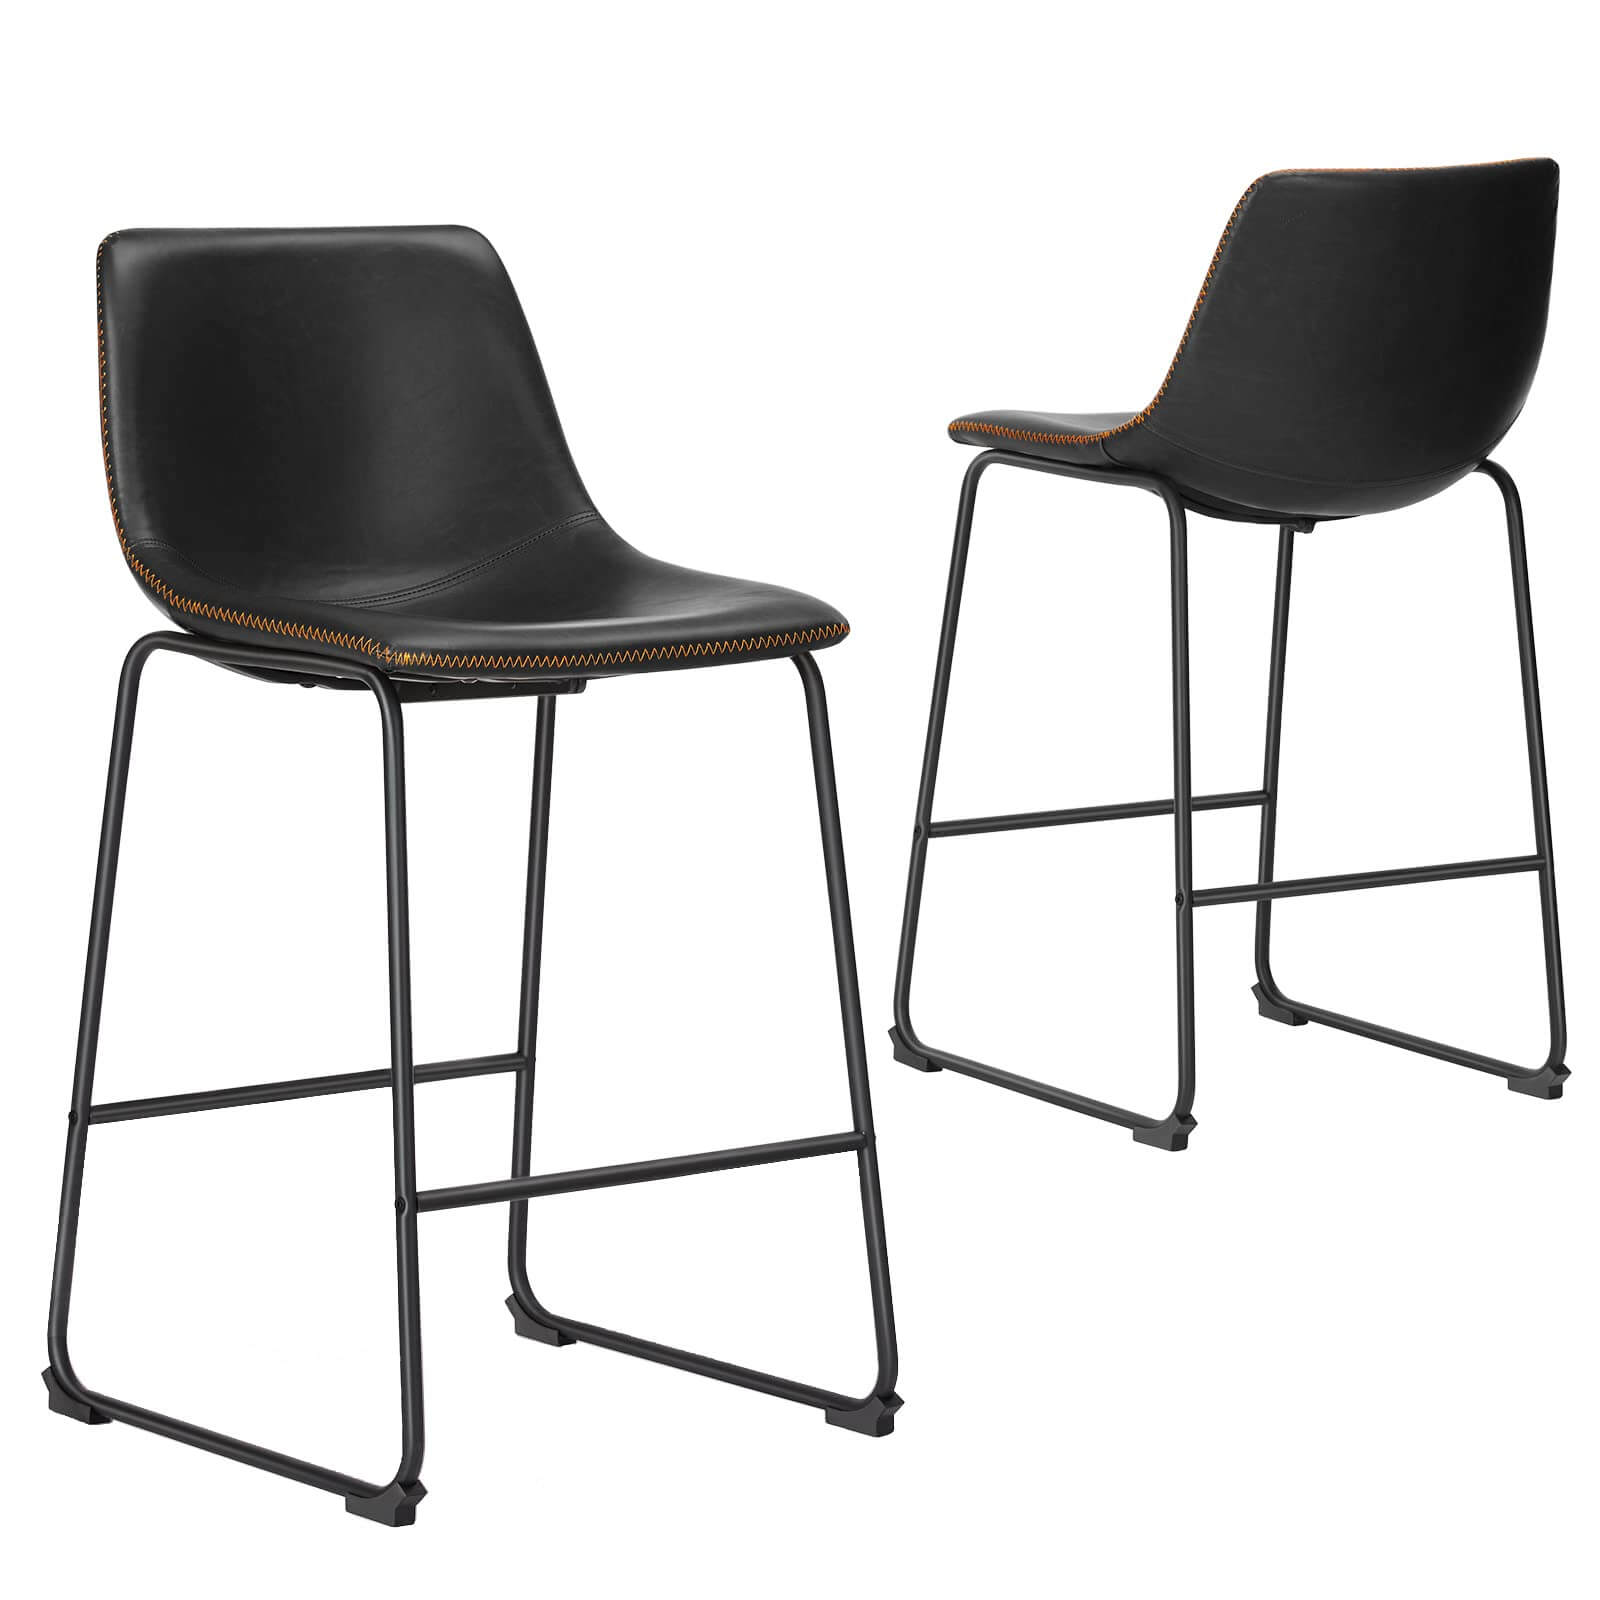 26-inch-dining-chairs#Color_Black#Size_26 in